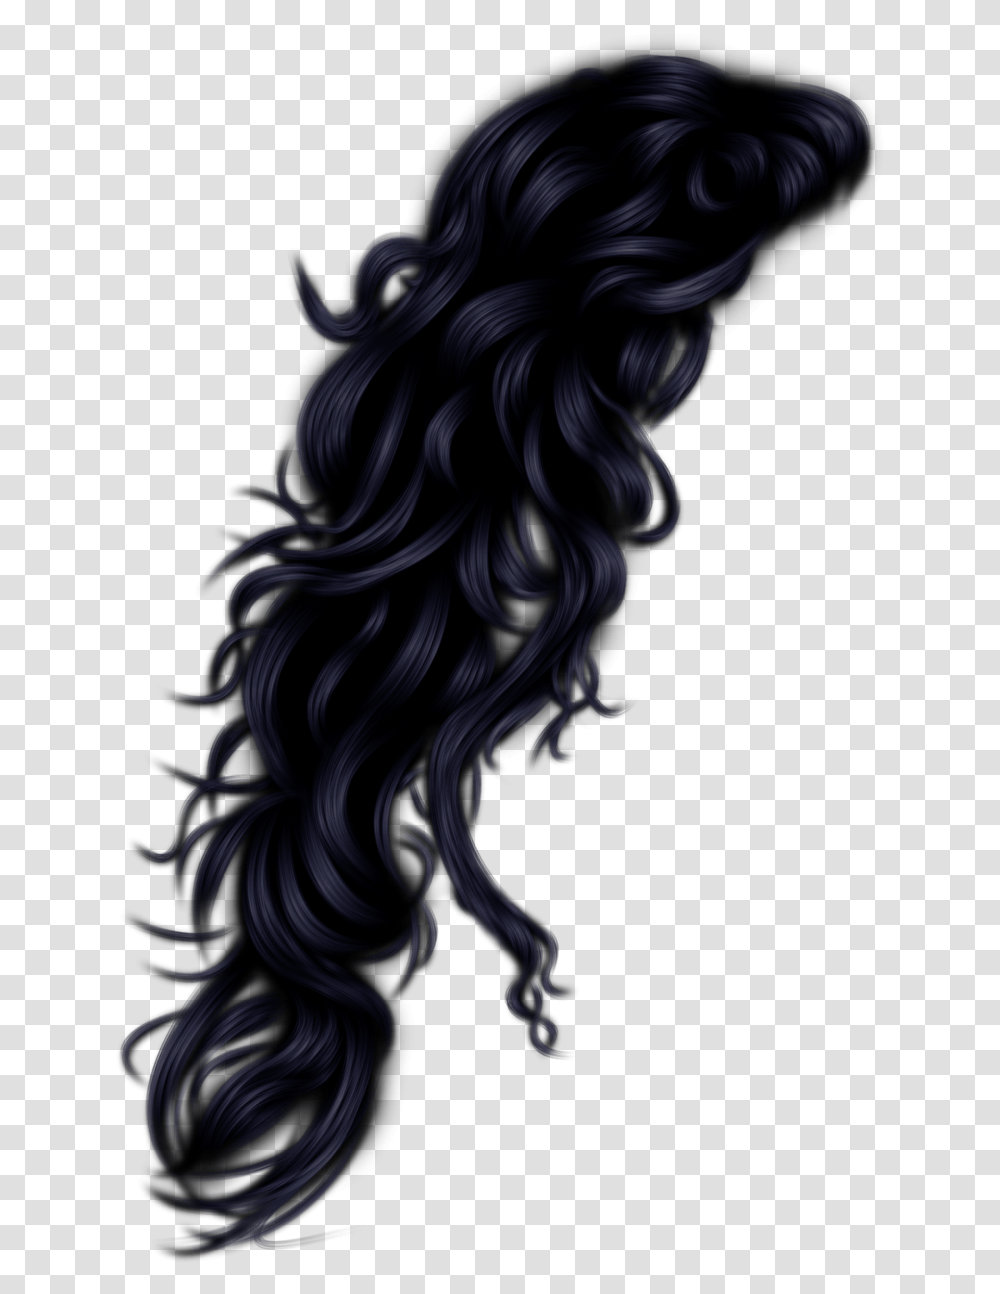 Hair Images Background Hair, Fire, Flame Transparent Png